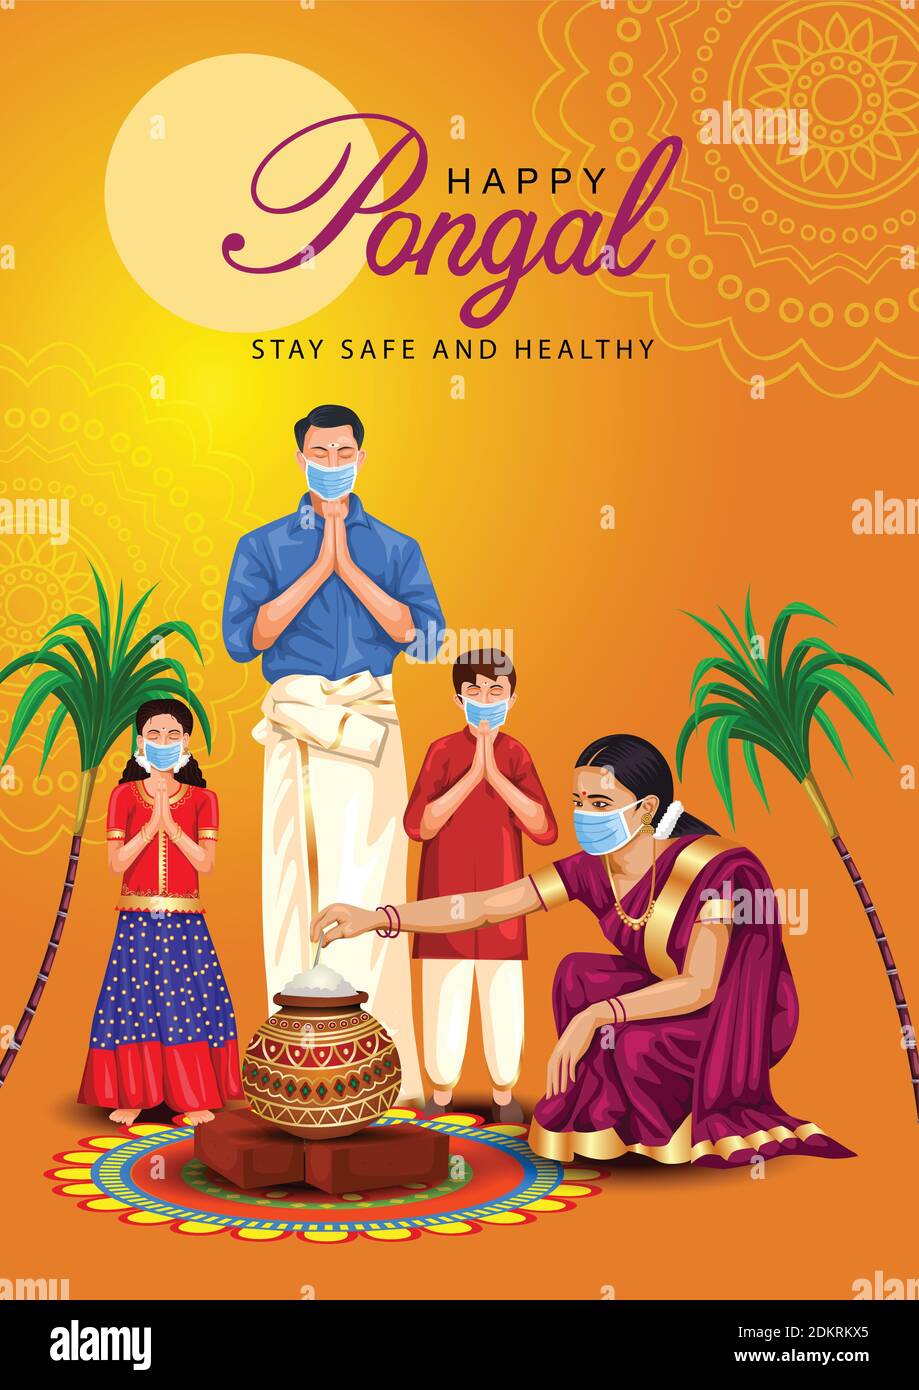 Happy Pongal celebration with sugarcane, Rangoli, pot and rice. Tamil family offering prayers. Indian cultural festival celebration concept vector ill Stock Vector